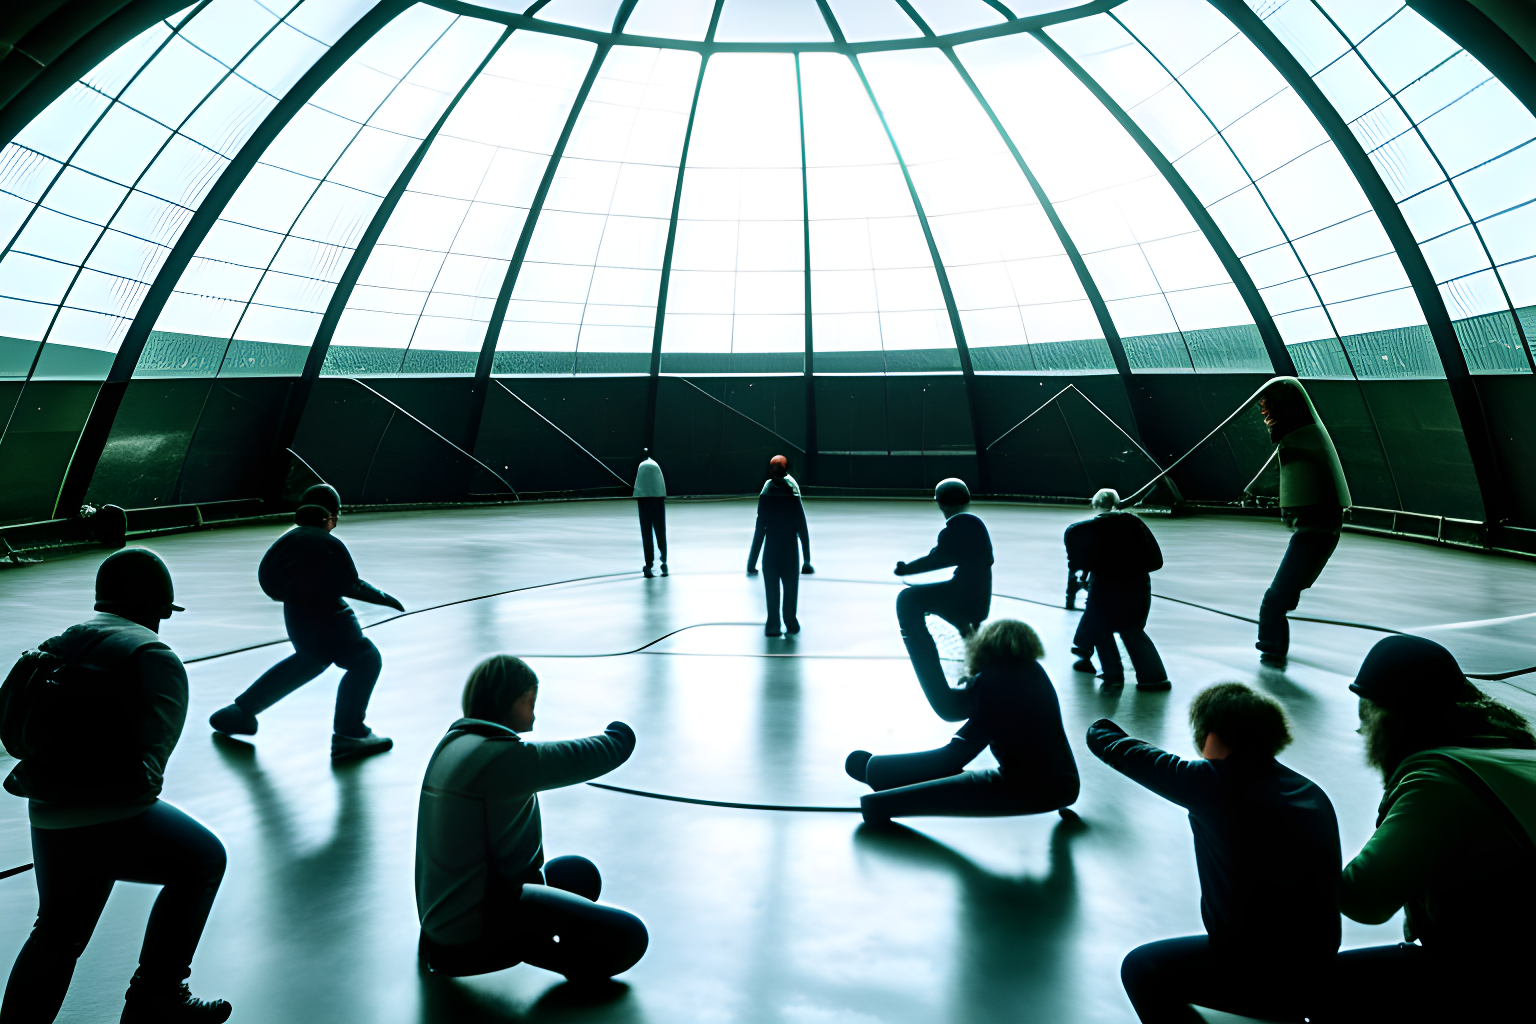 humans fighting in a dome